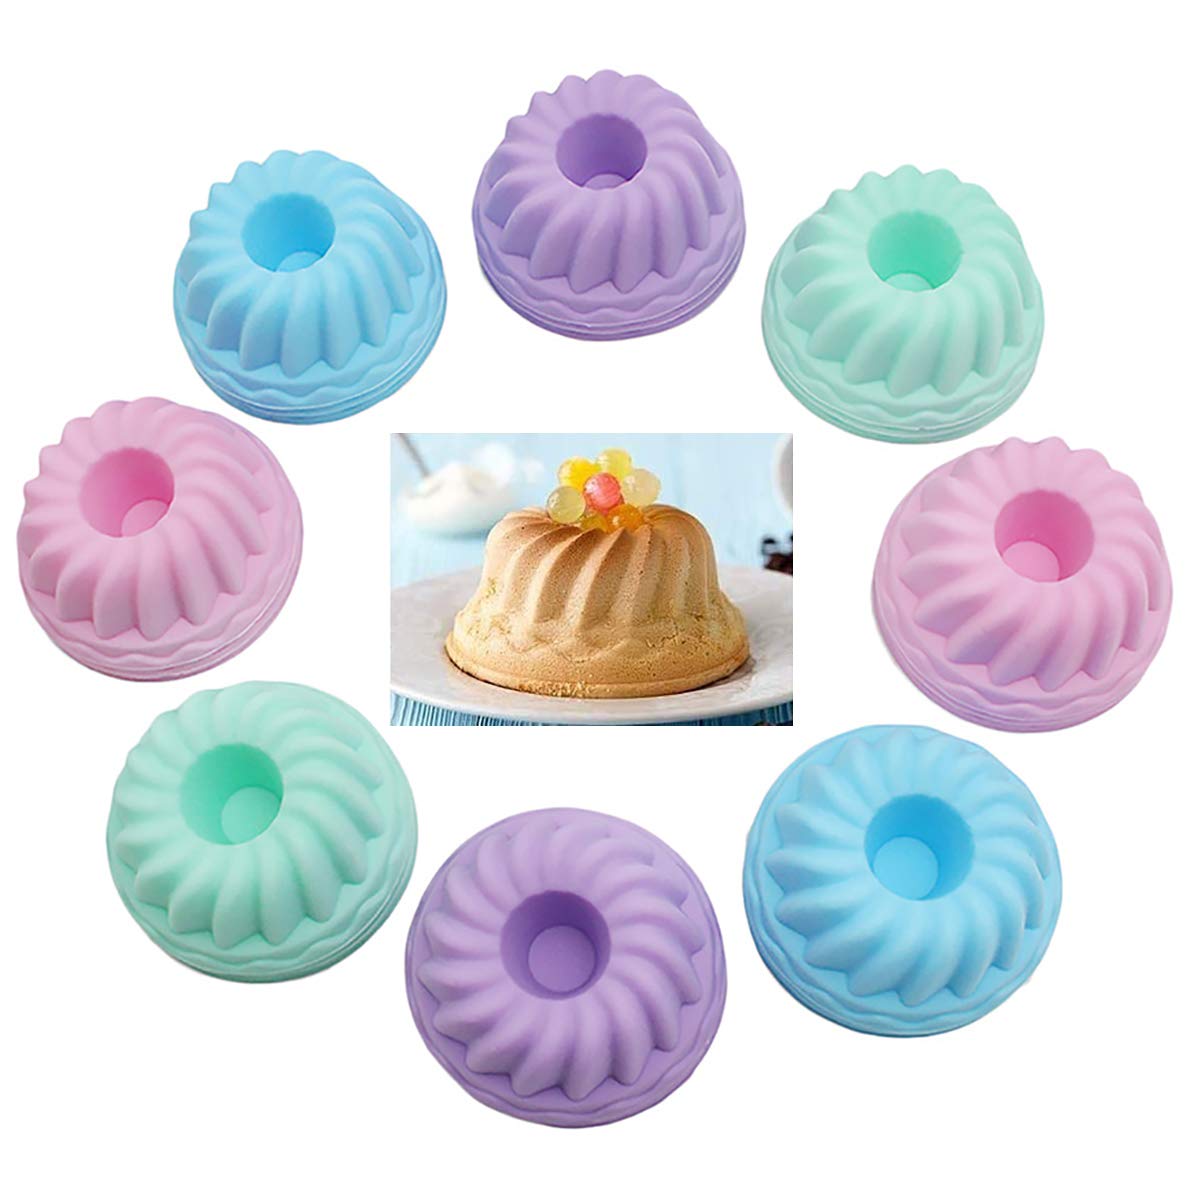 UpTuoLi Silicone Donut Pans for Baking, 12Pcs Mini bundt Pan Silicone Donut Molds, Nonstick Doughnut Muffin Pumpkin Cup Cupcake Molds Pan, Mini Fluted Tube Silicone Baking Molds